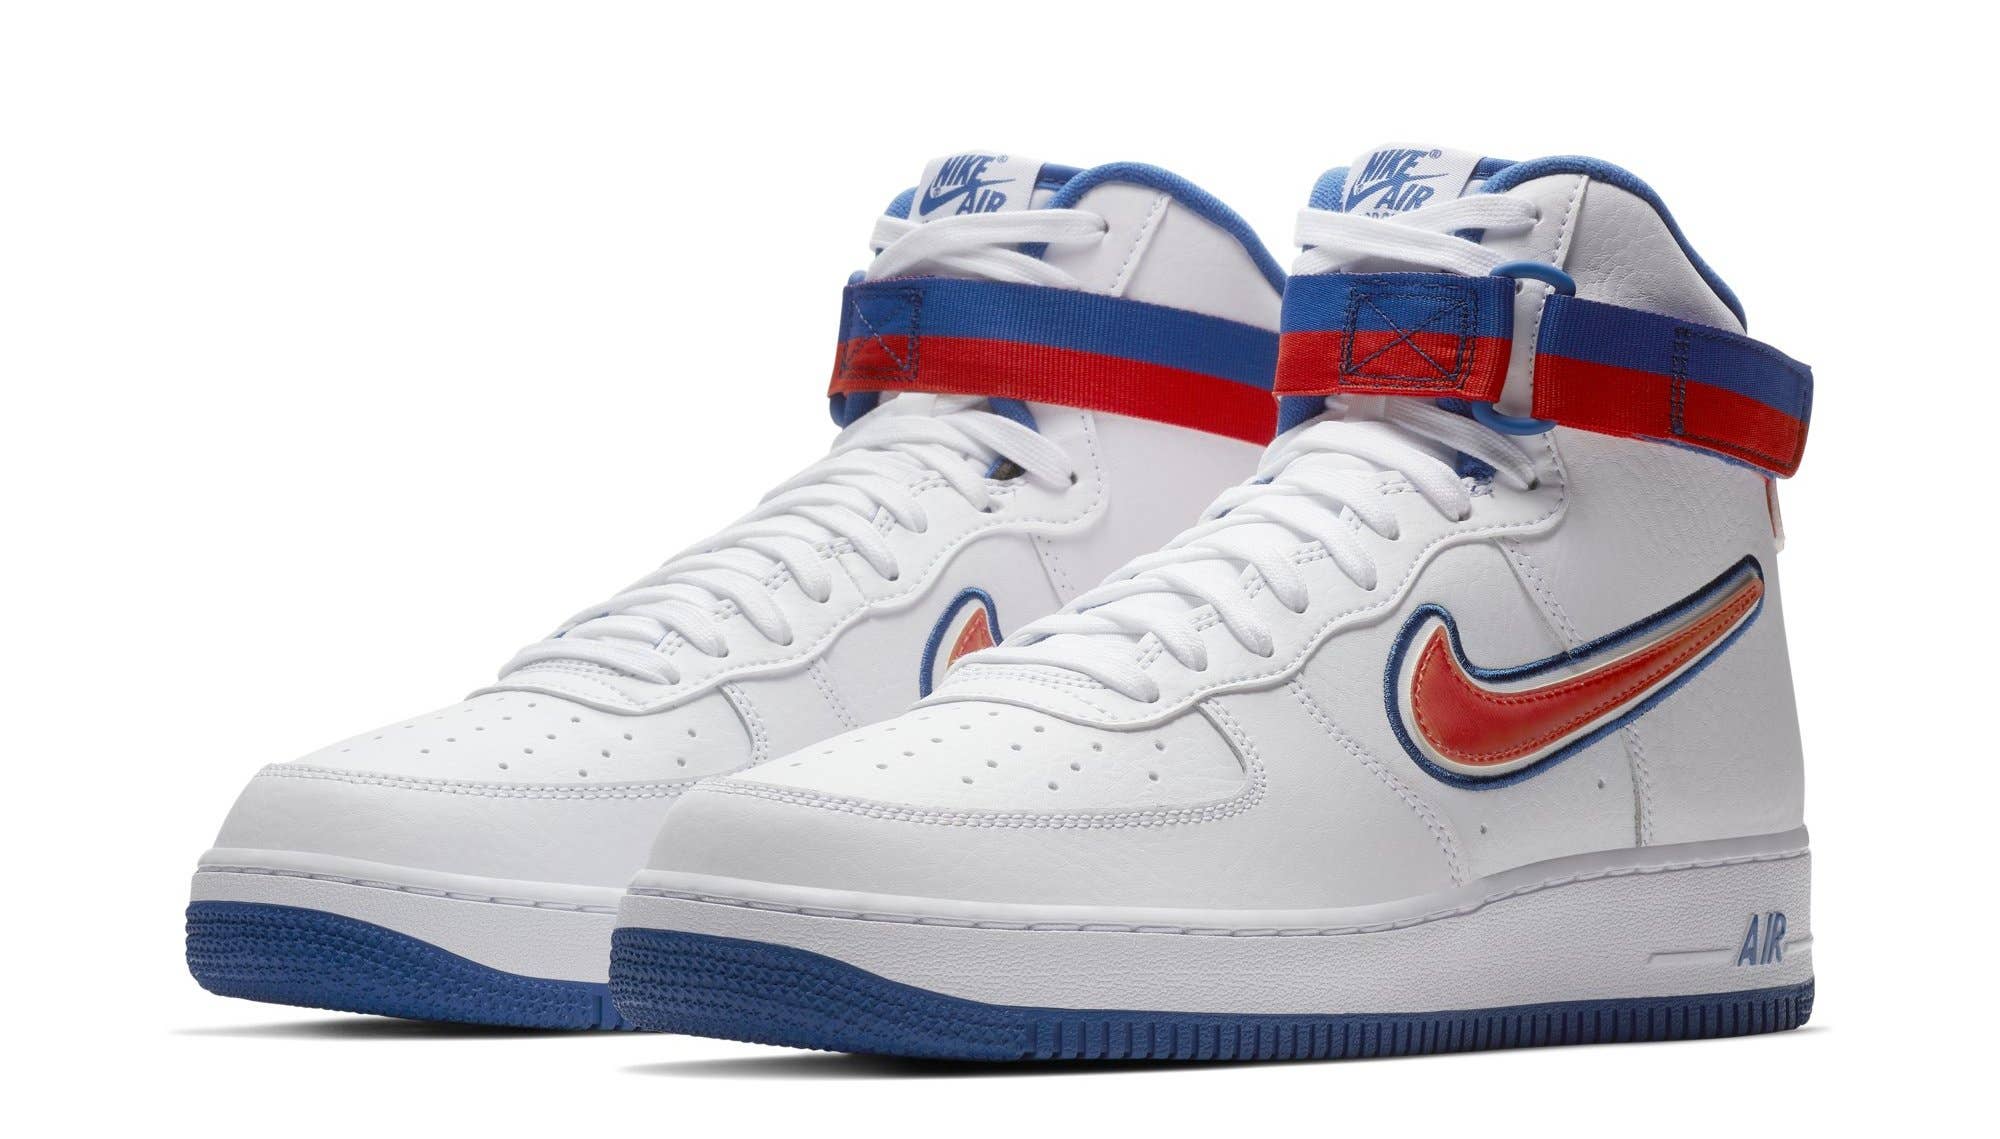 Knicks Colors on New NBA Air Force 1s